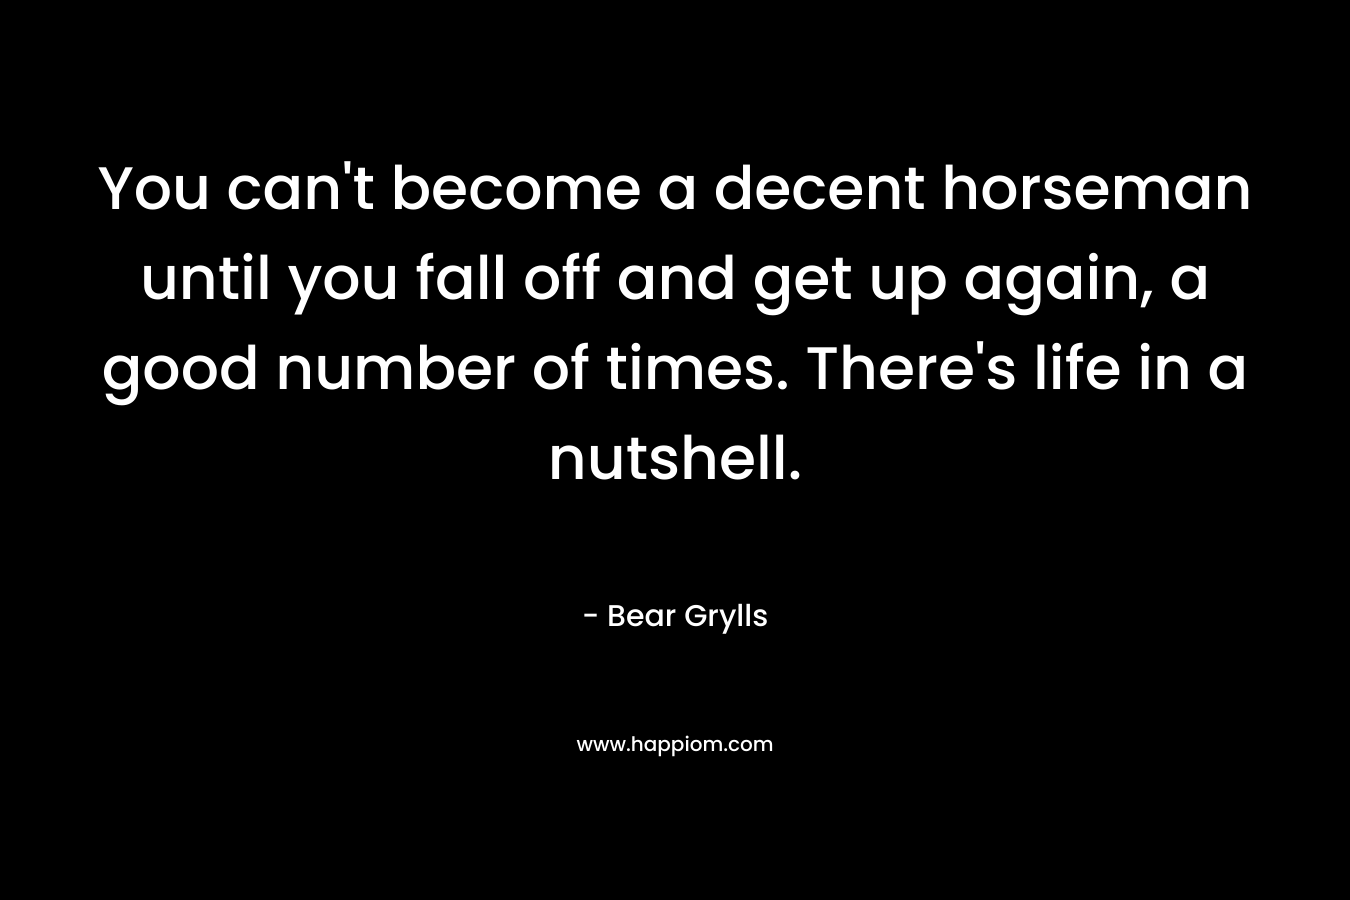 You can't become a decent horseman until you fall off and get up again, a good number of times.  There's life in a nutshell.